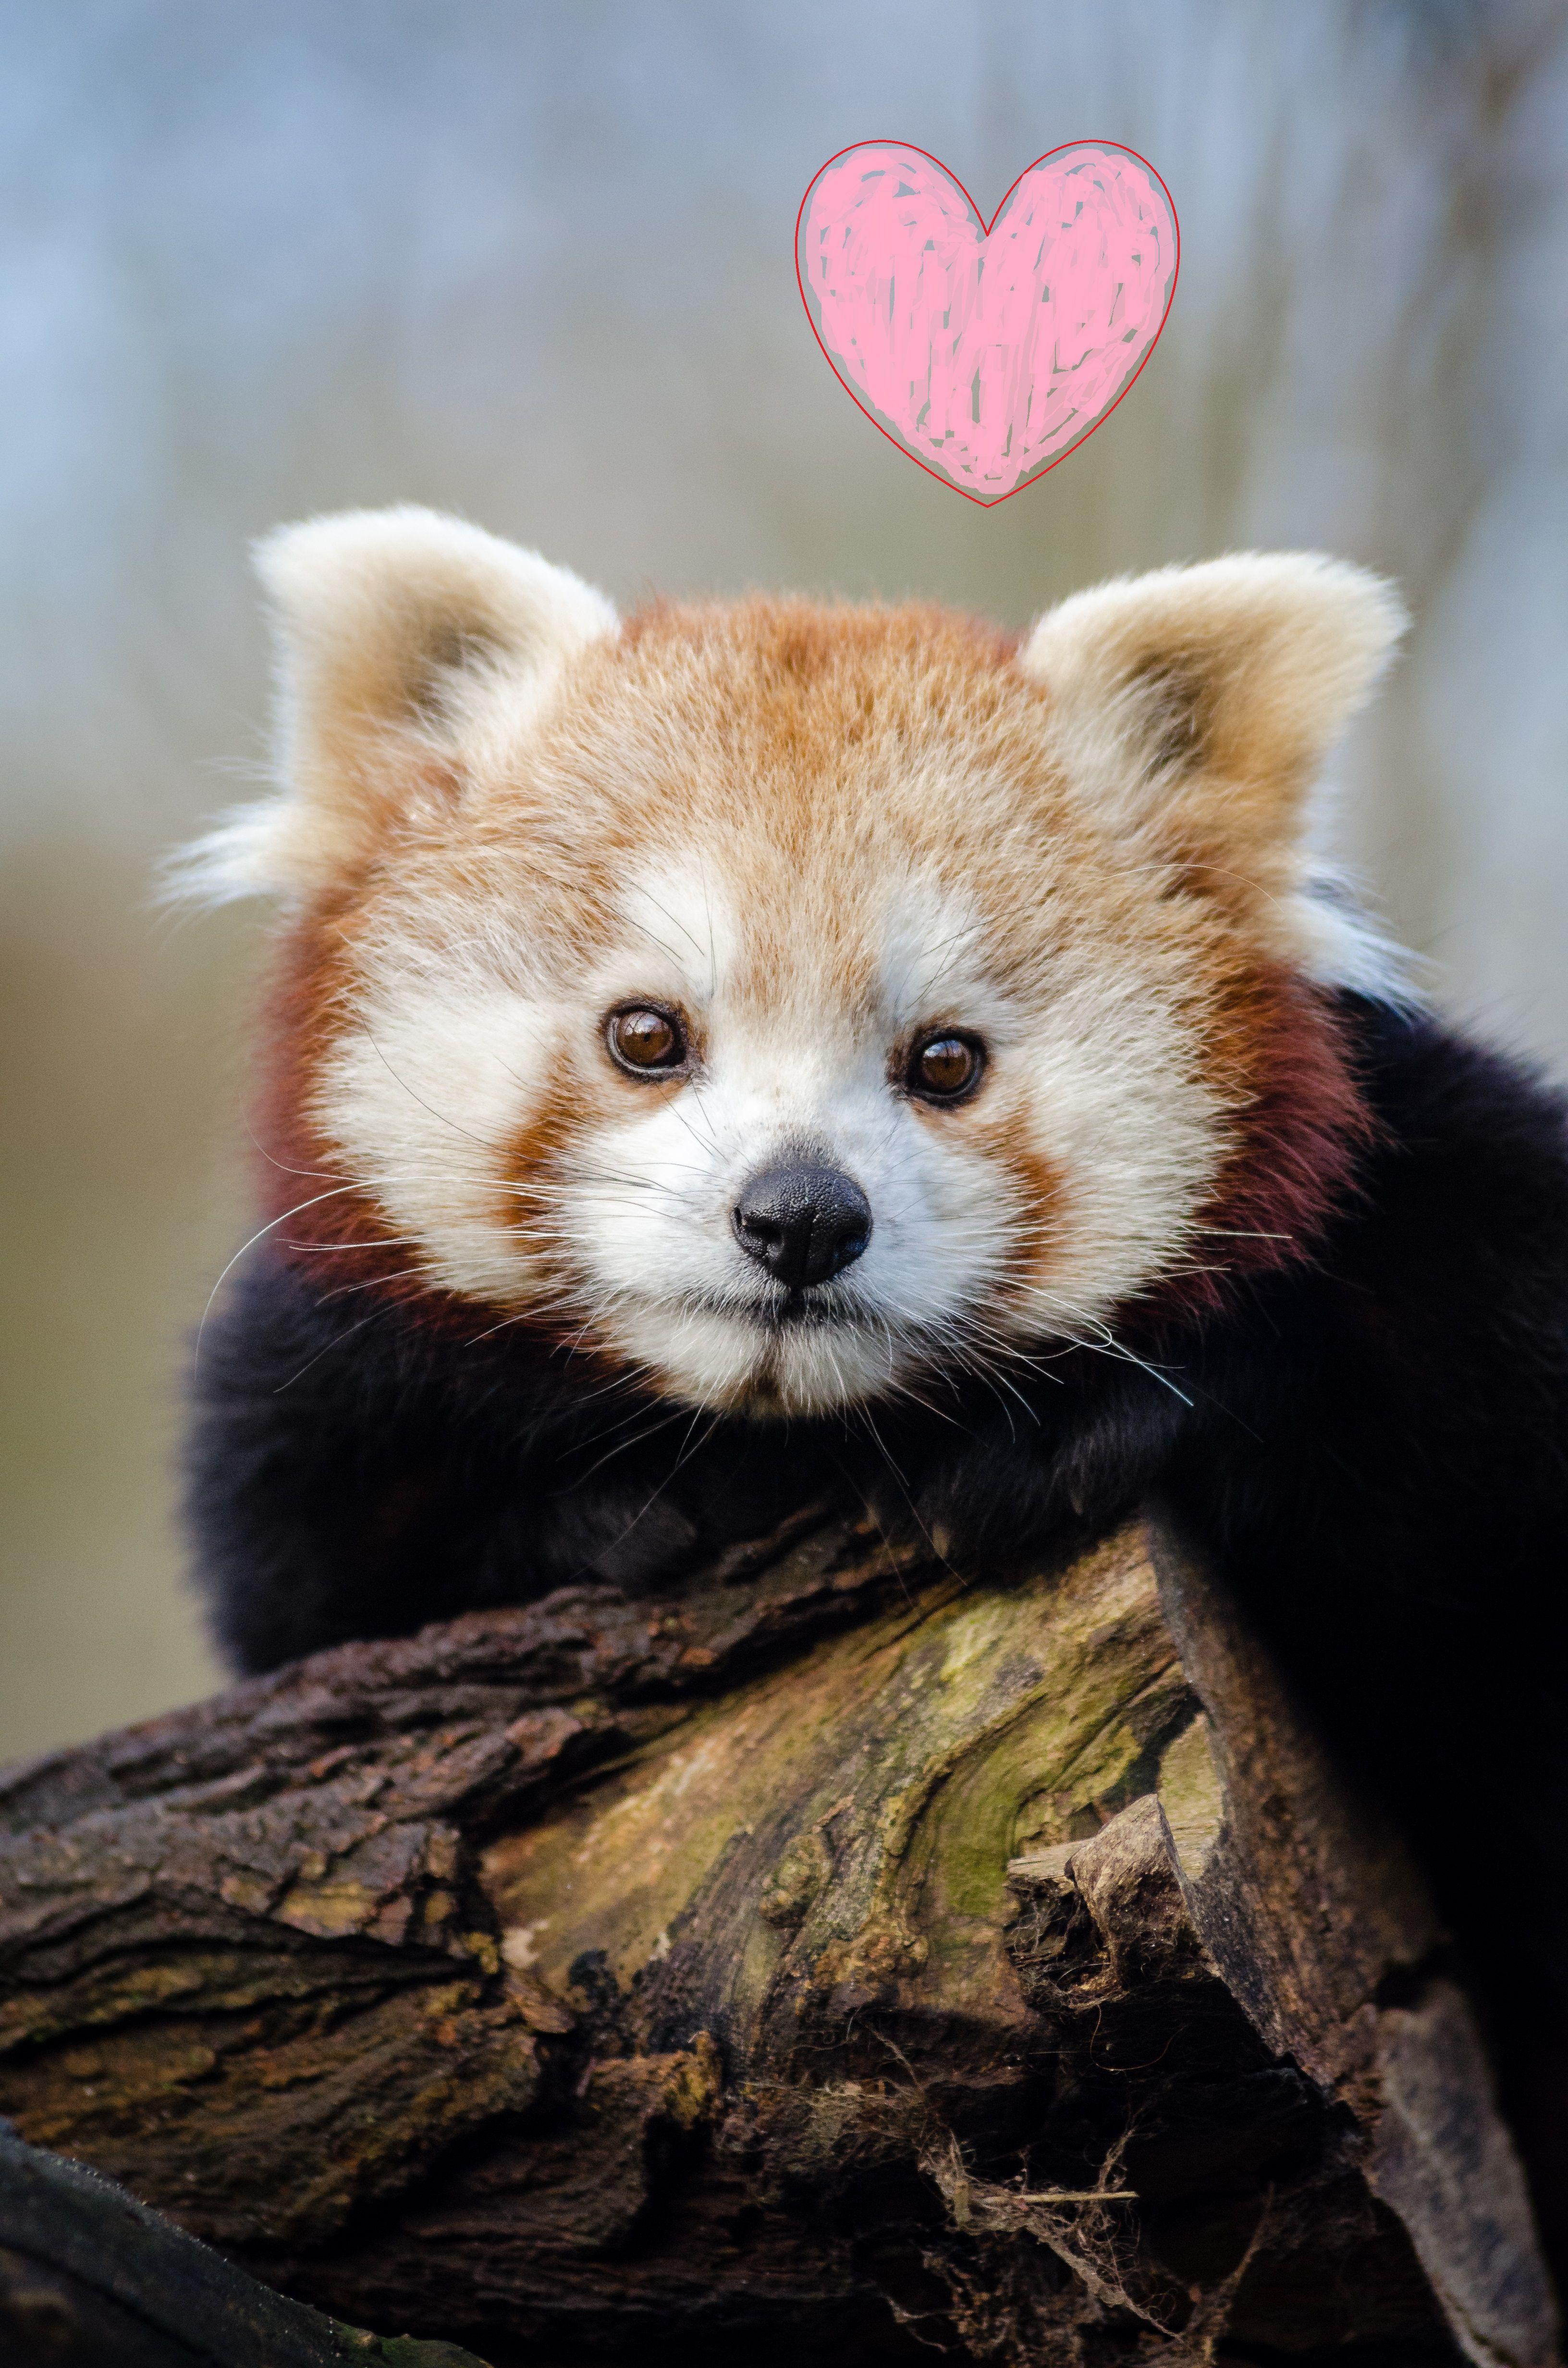 Happy Valentine's Day from Red Panda Network!. Red panda